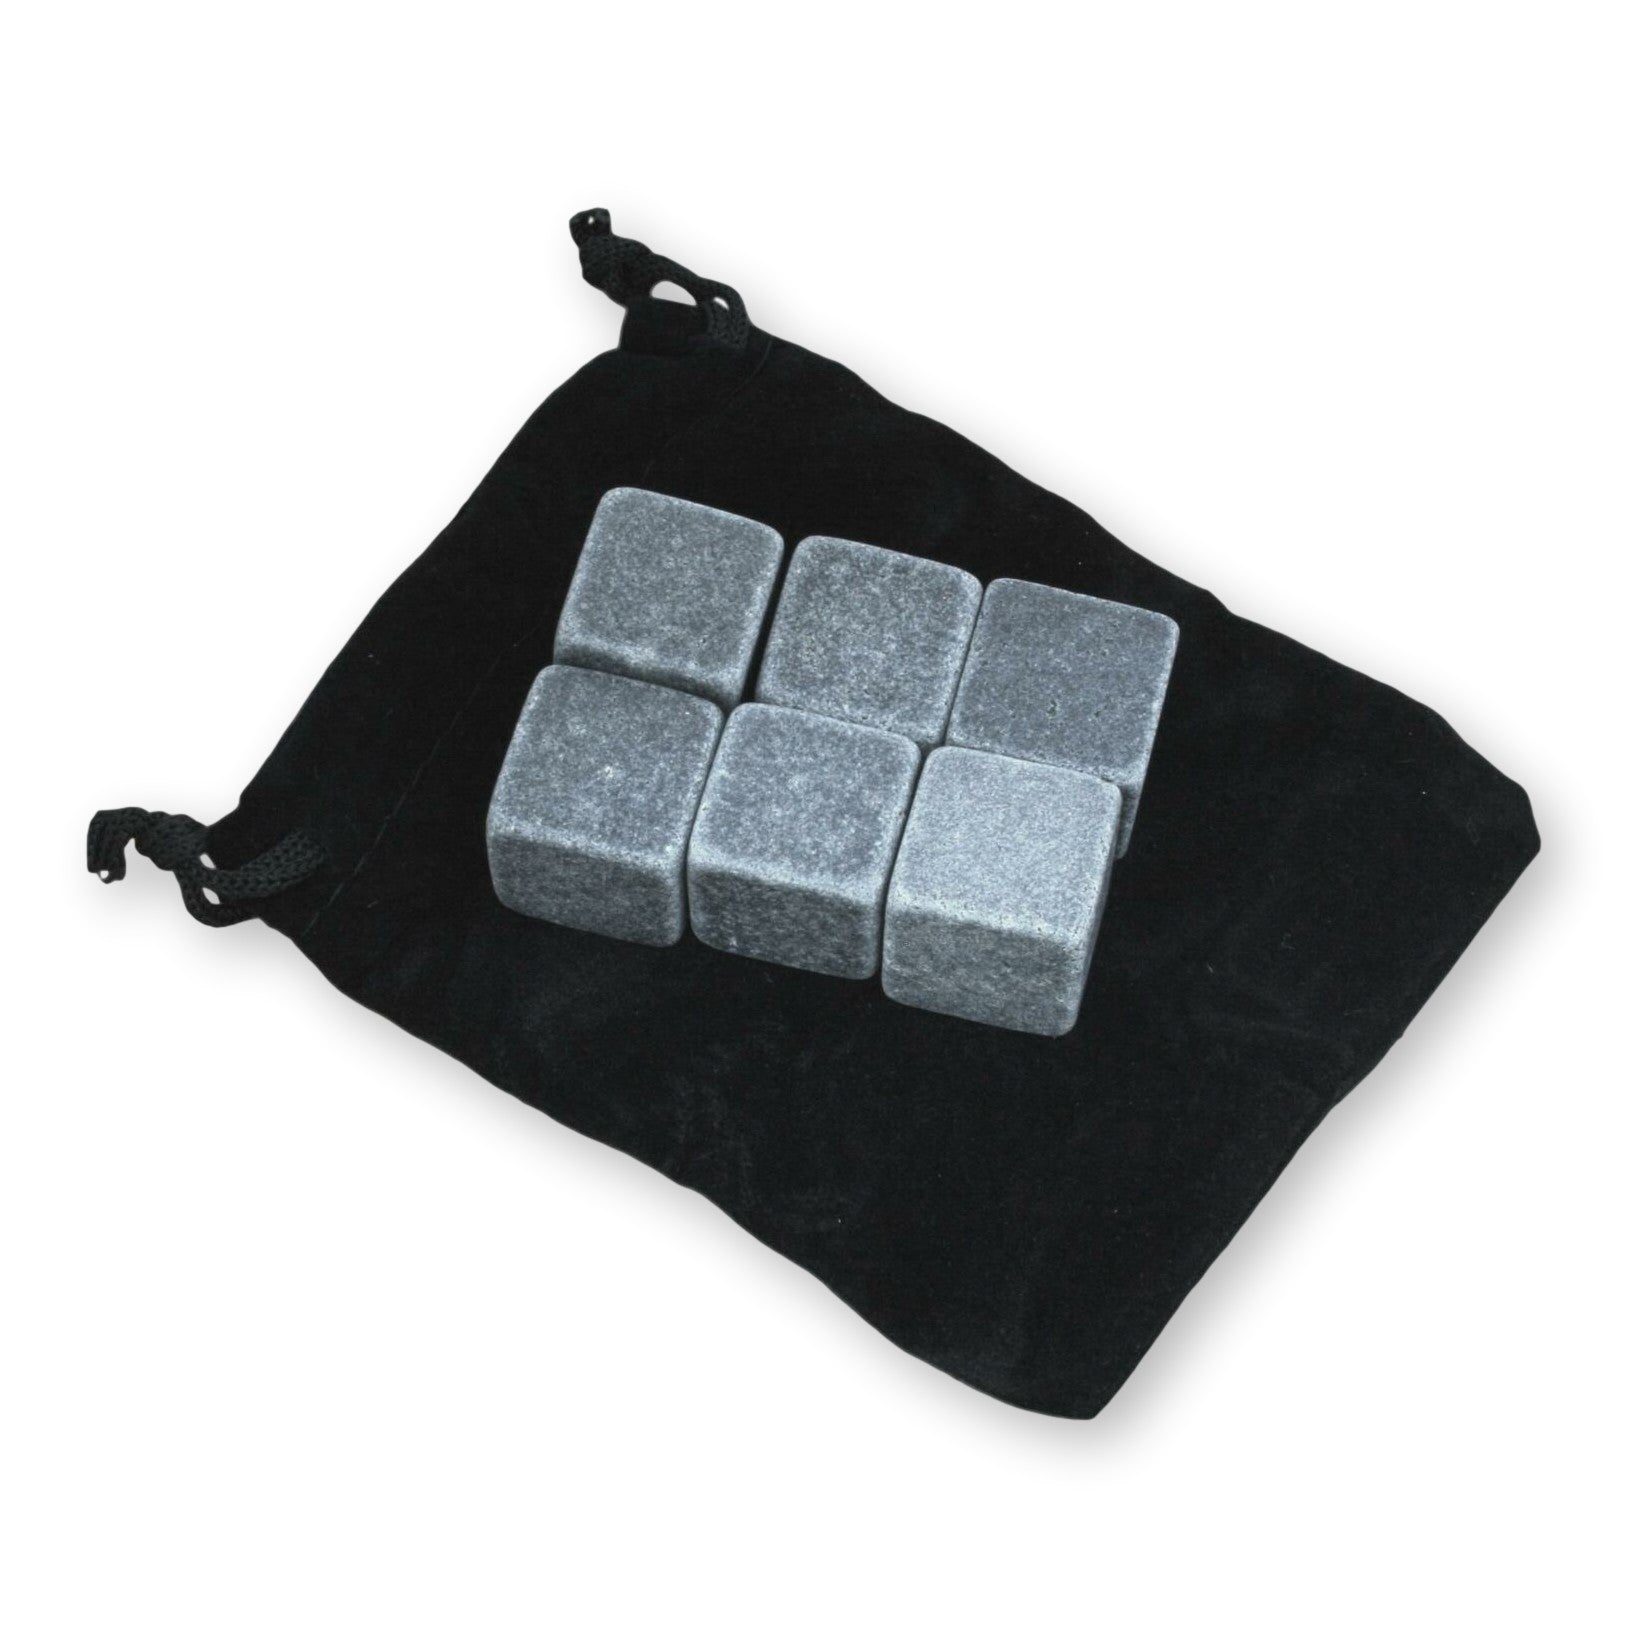 Ice Cube Stones In Pouch